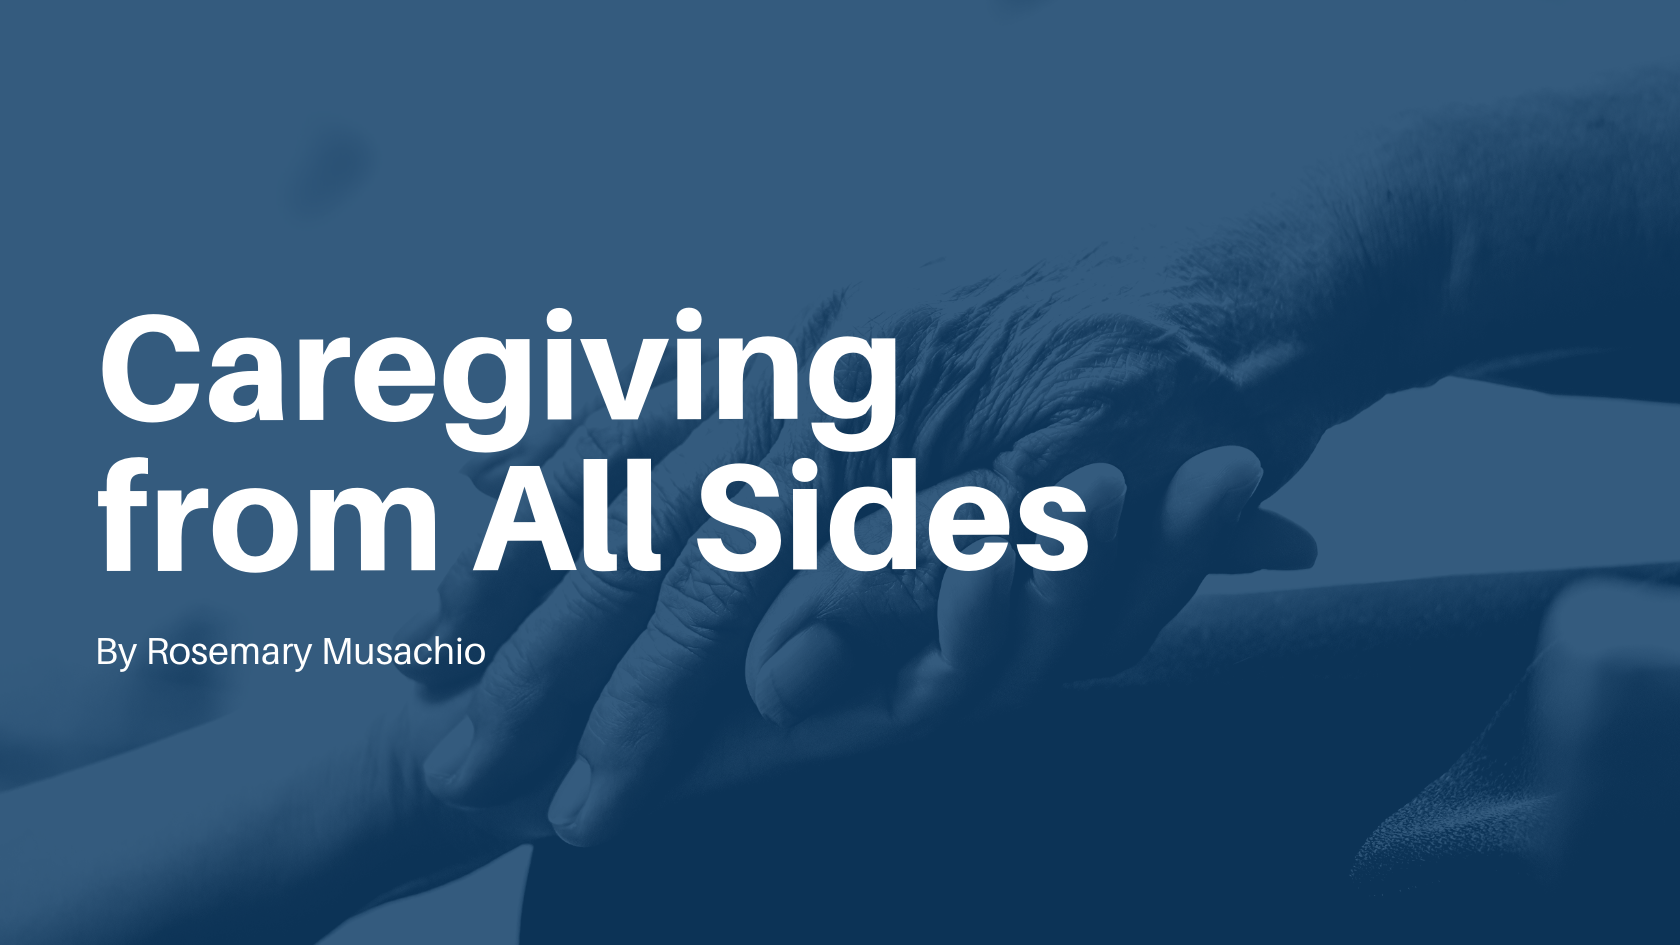 Caregiving from All Sides by Rosemary Musachio